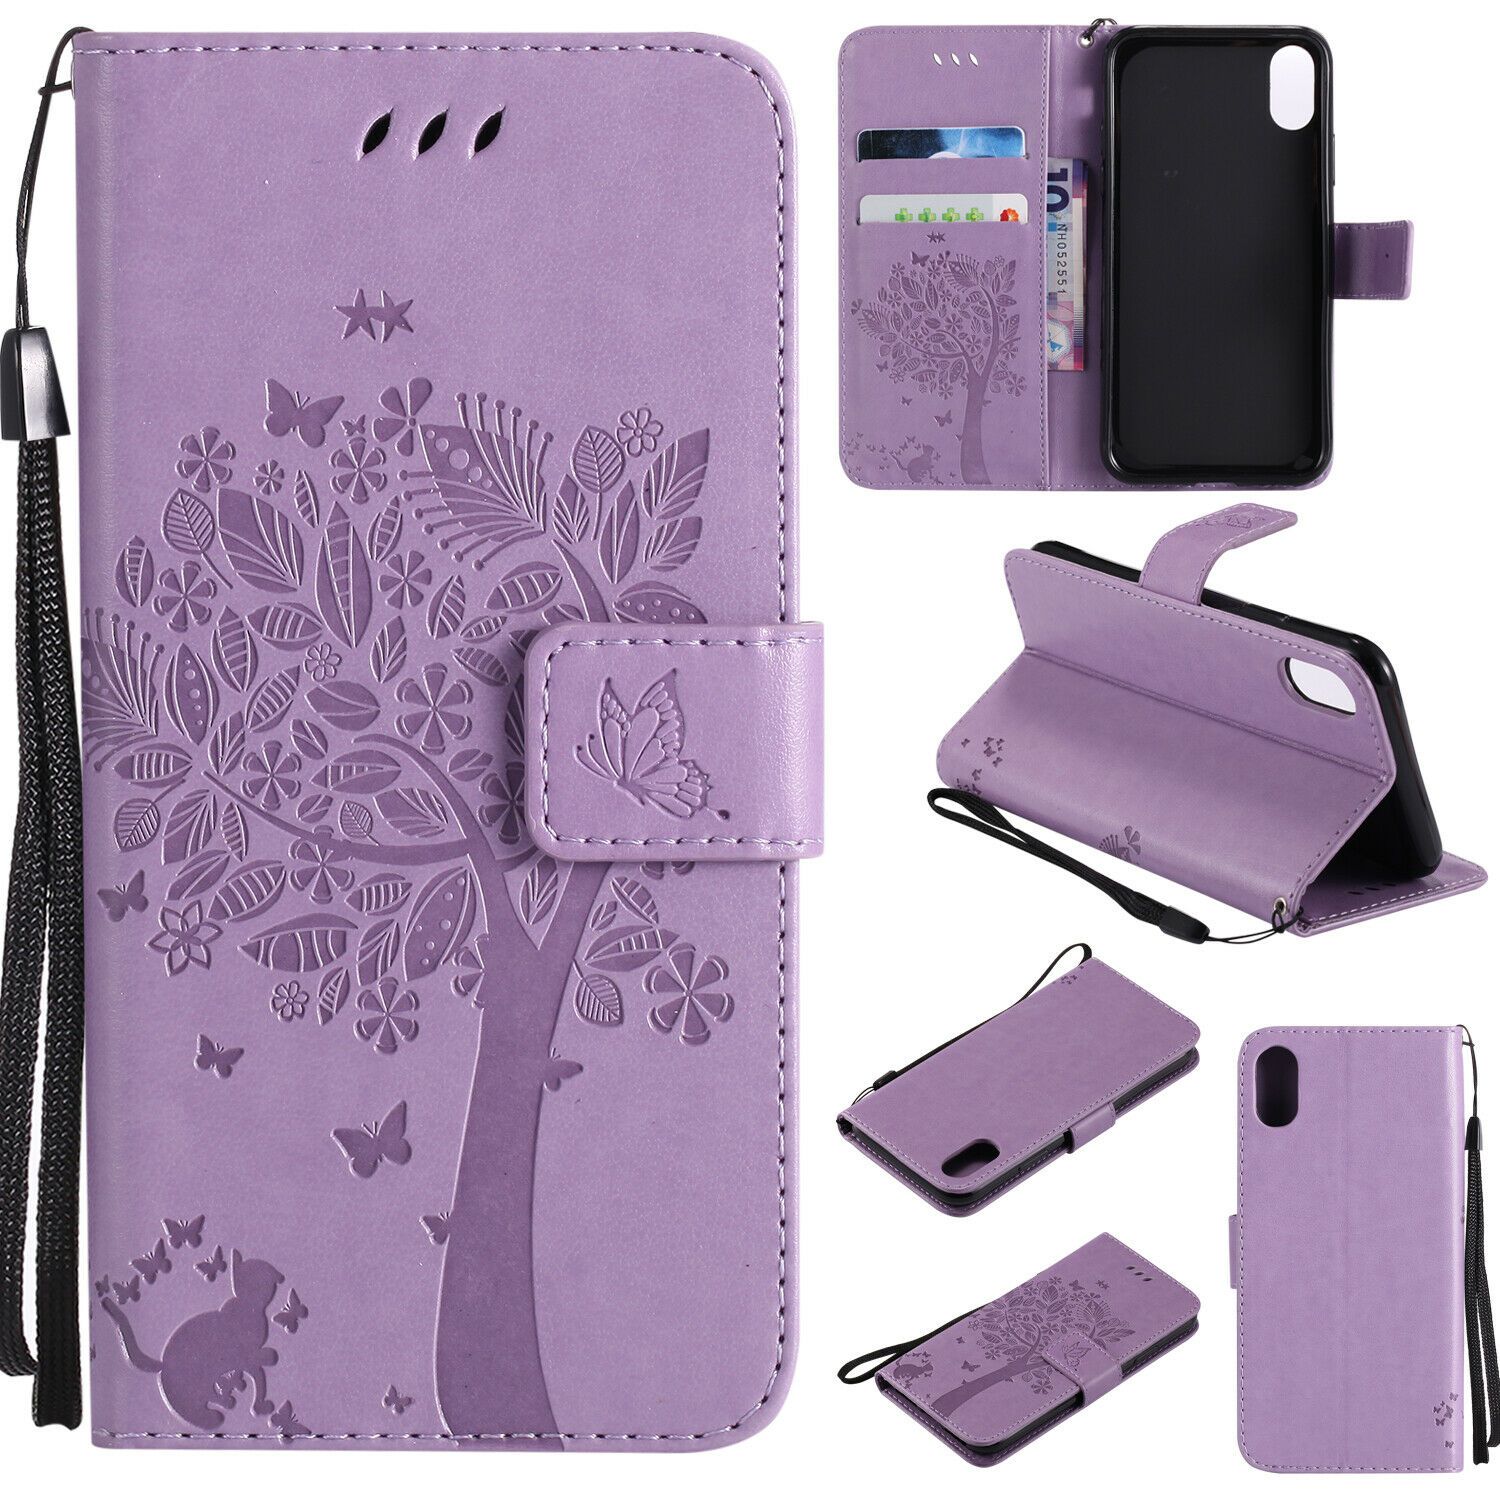 Magnetic Leather Wallet Case For iPhone 8 7 6s Plus X XS MAX XR Flip Cover Stand stekim-92 Light purple iPhone6/6S 